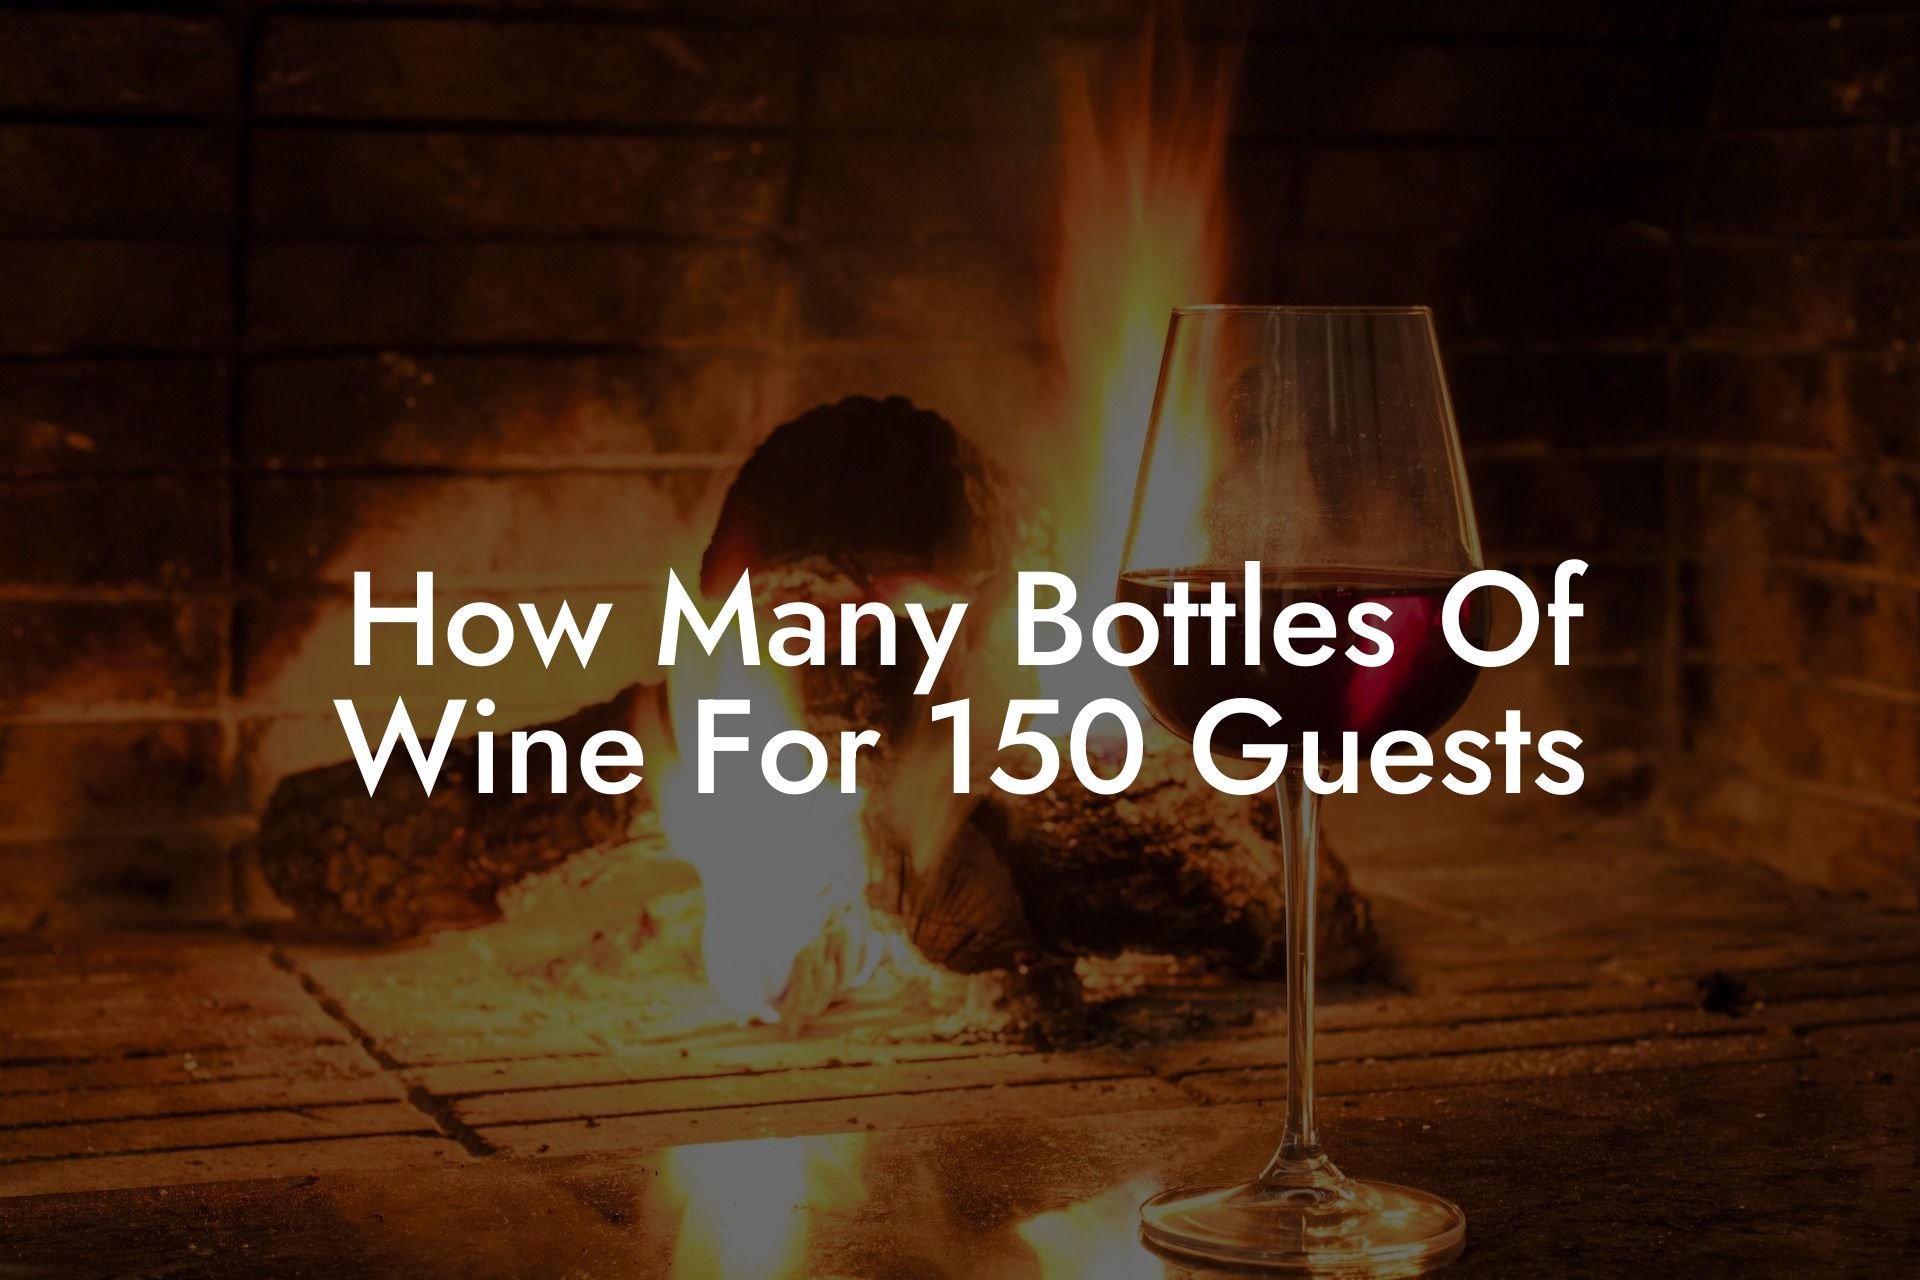 How Many Bottles Of Wine For 150 Guests